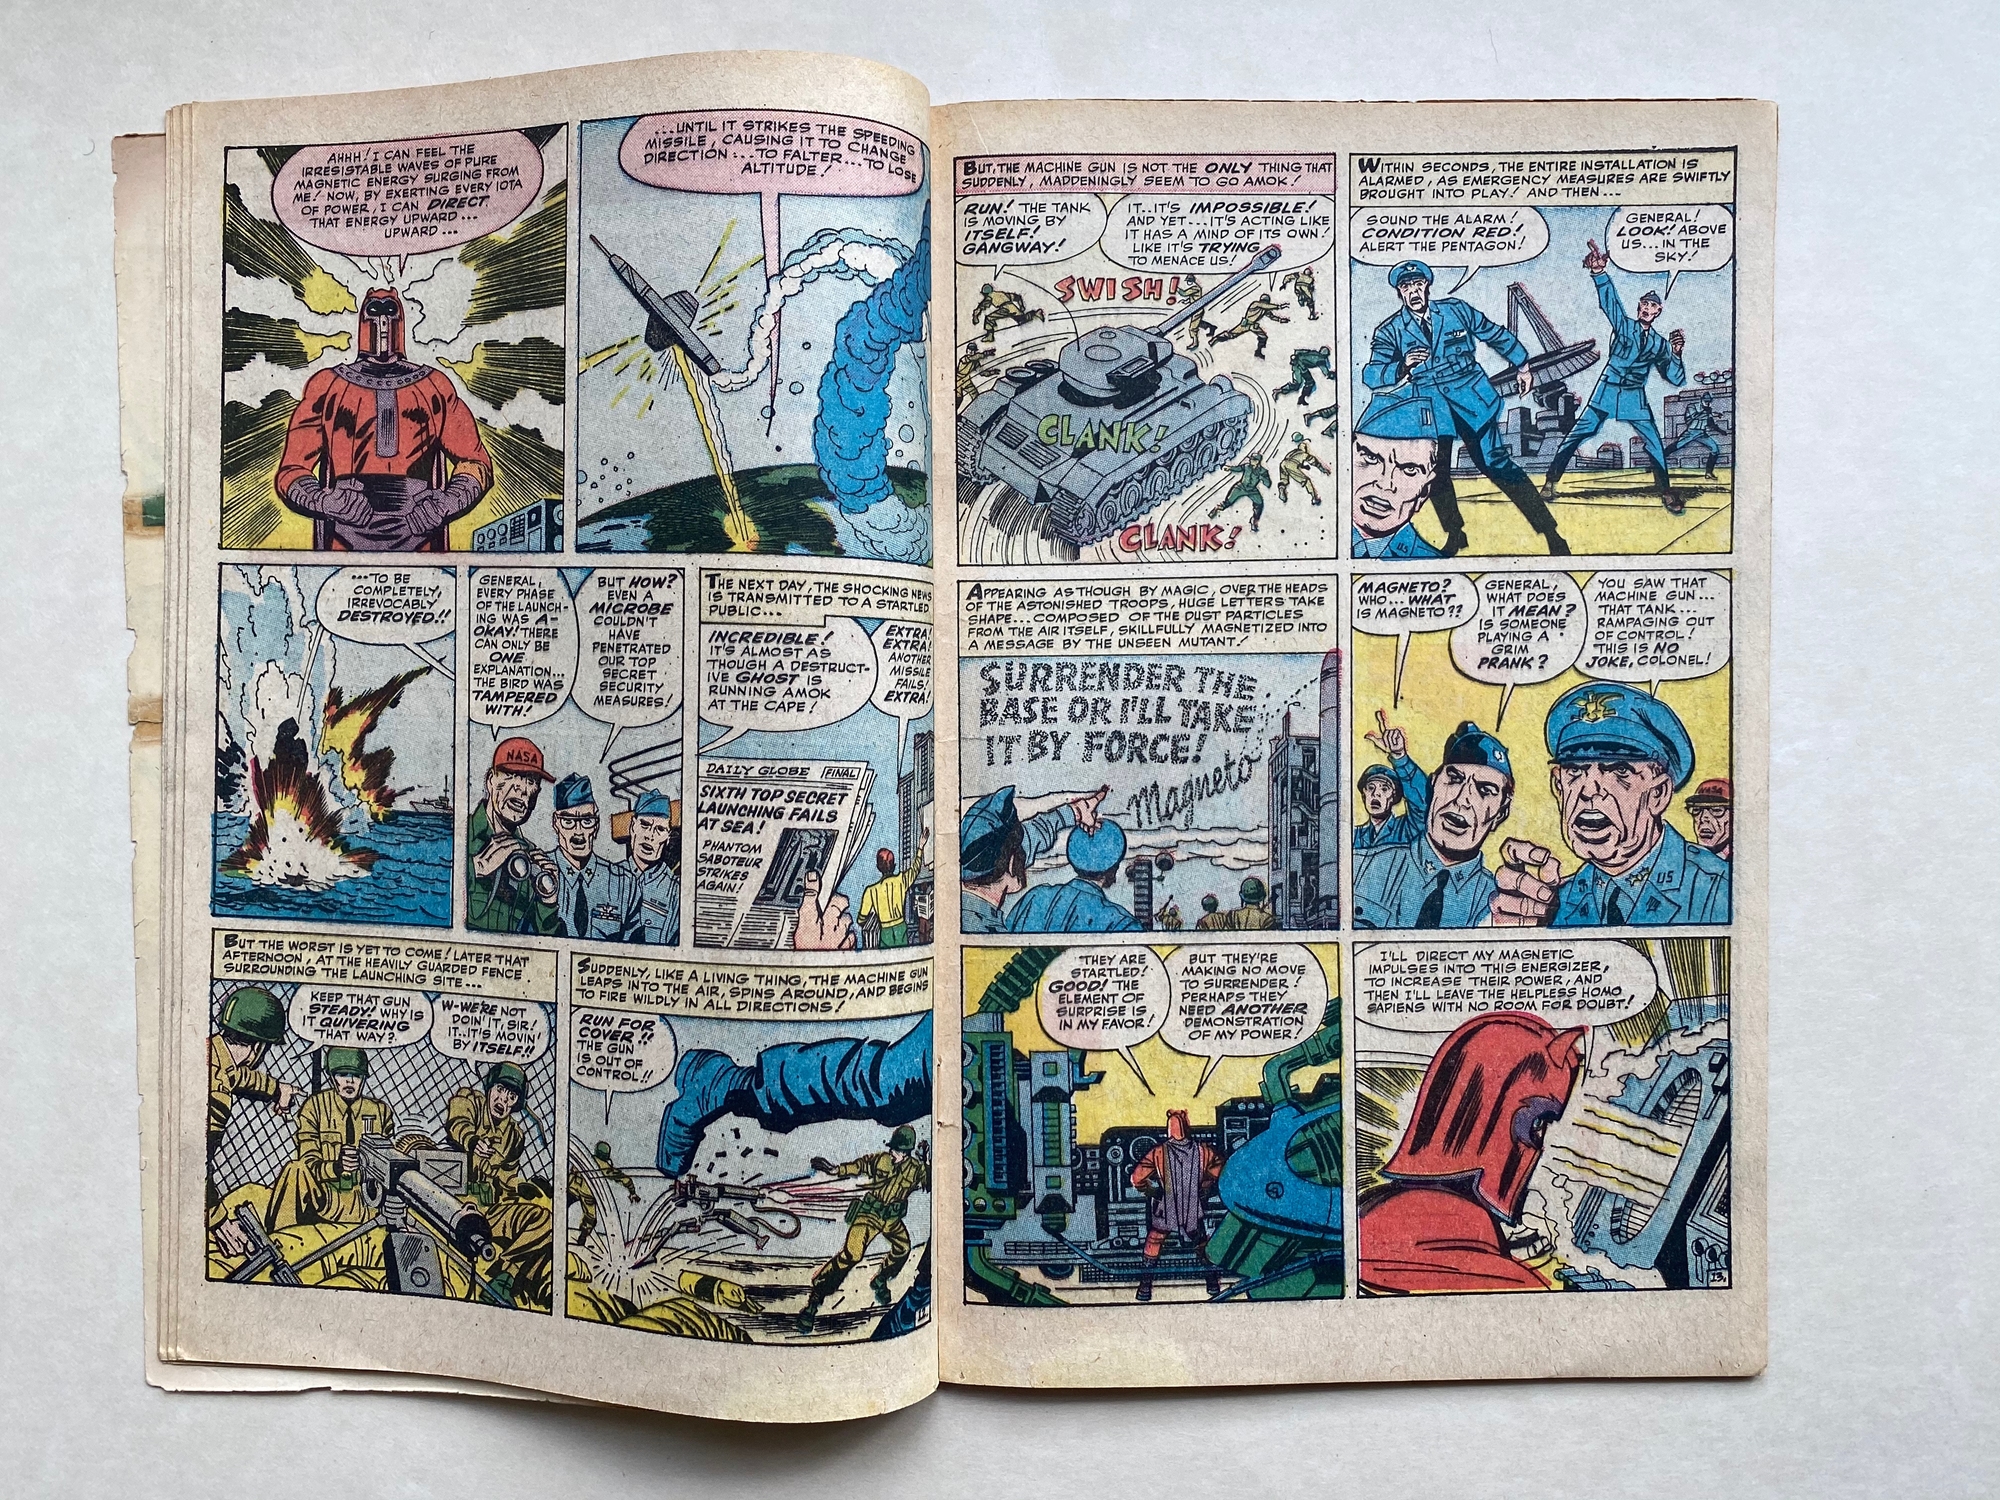 UNCANNY X-MEN #1 - (1963 - MARVEL - Pence Copy) - One of the most important Marvel Silver Age keys - - Image 7 of 9